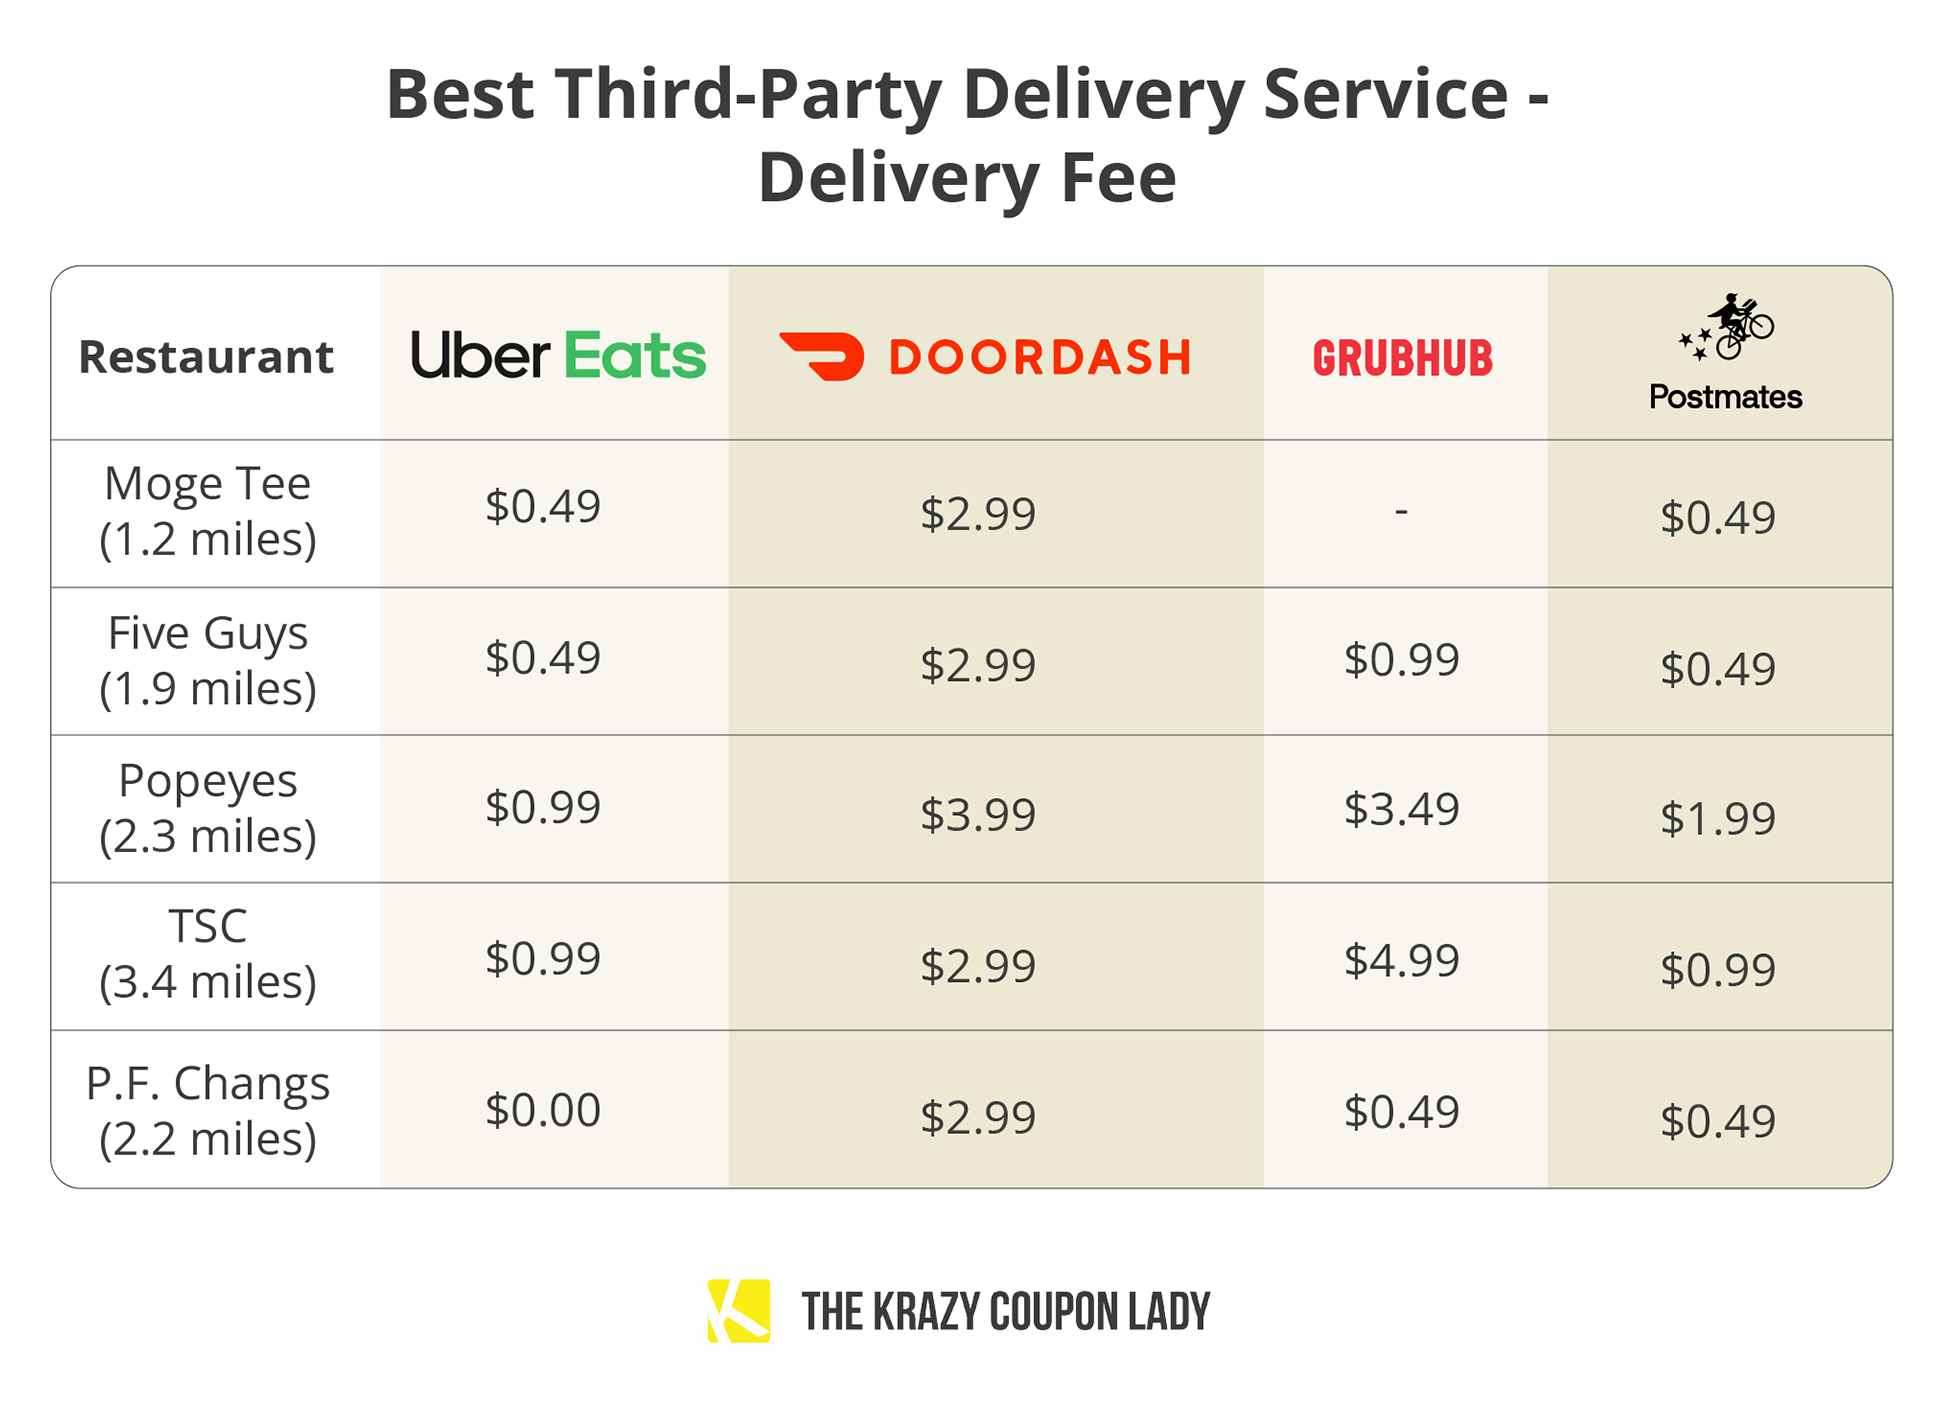 best third-party food delivery service by delivery fee graphic